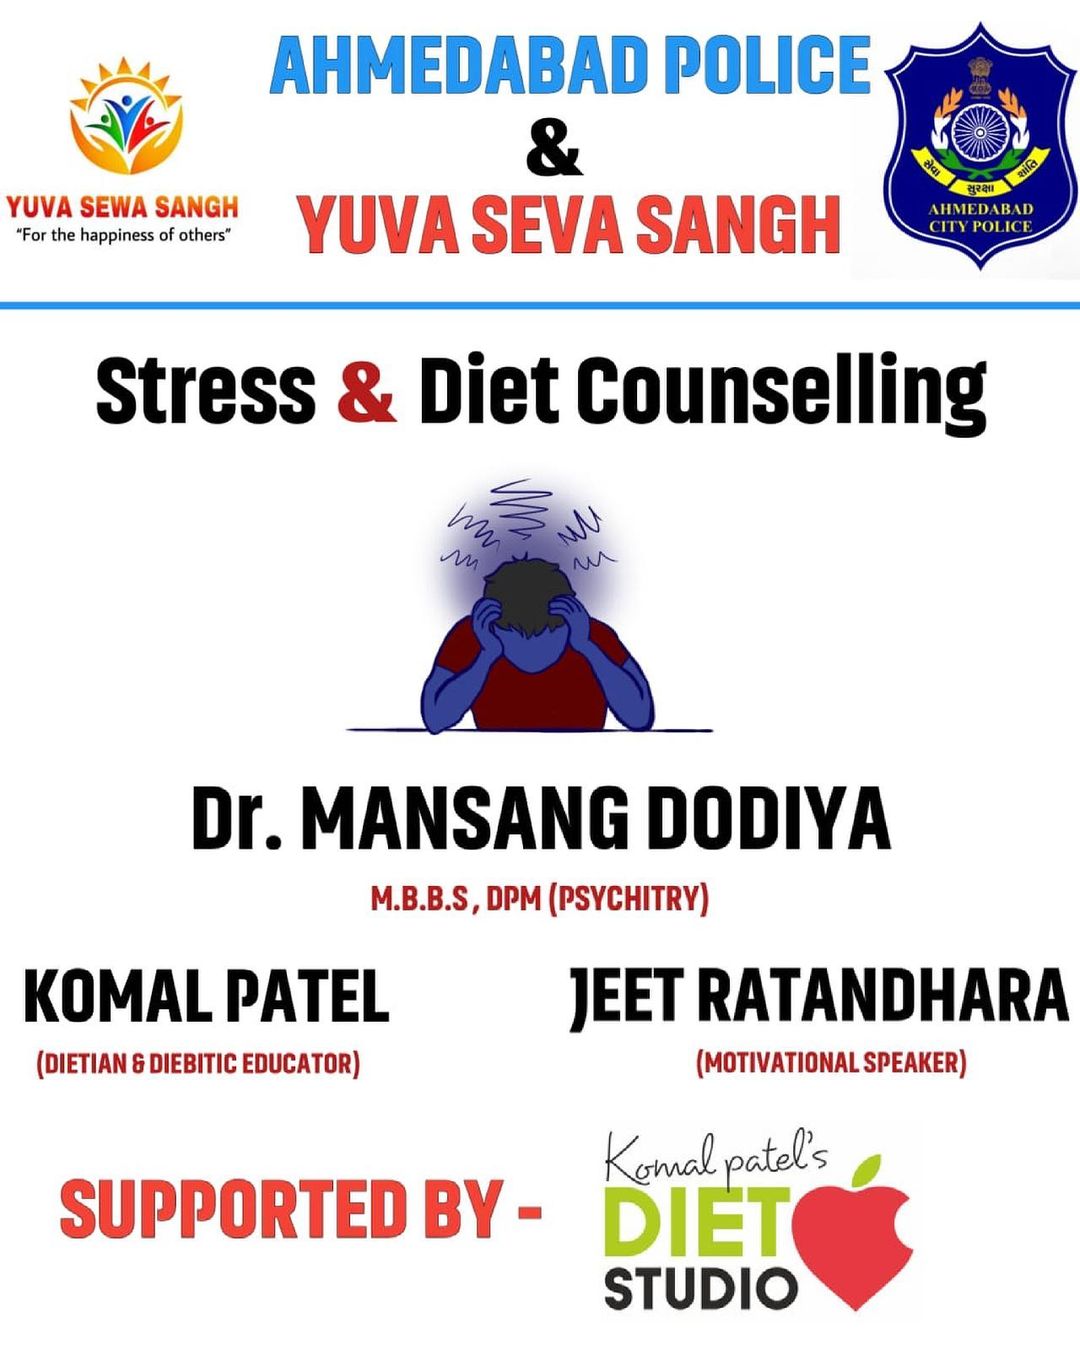 Let’s think of our protectors!!!!!
An special awareness program to talk about physical fitness, food and mental health with Ahmedabad Police and @yuvasewasangh

#ahmedabad #AhmedabadPolice #policehealth #dietadvice #komalpatel #policelivesmatter #ahmedabad_instagram #ahmedabadi #ahmedabadpolicefitnessreformproject #ahmedabad_instagram #ahmedabaddiaries #ahmedabadlife #dietplan #dietitian